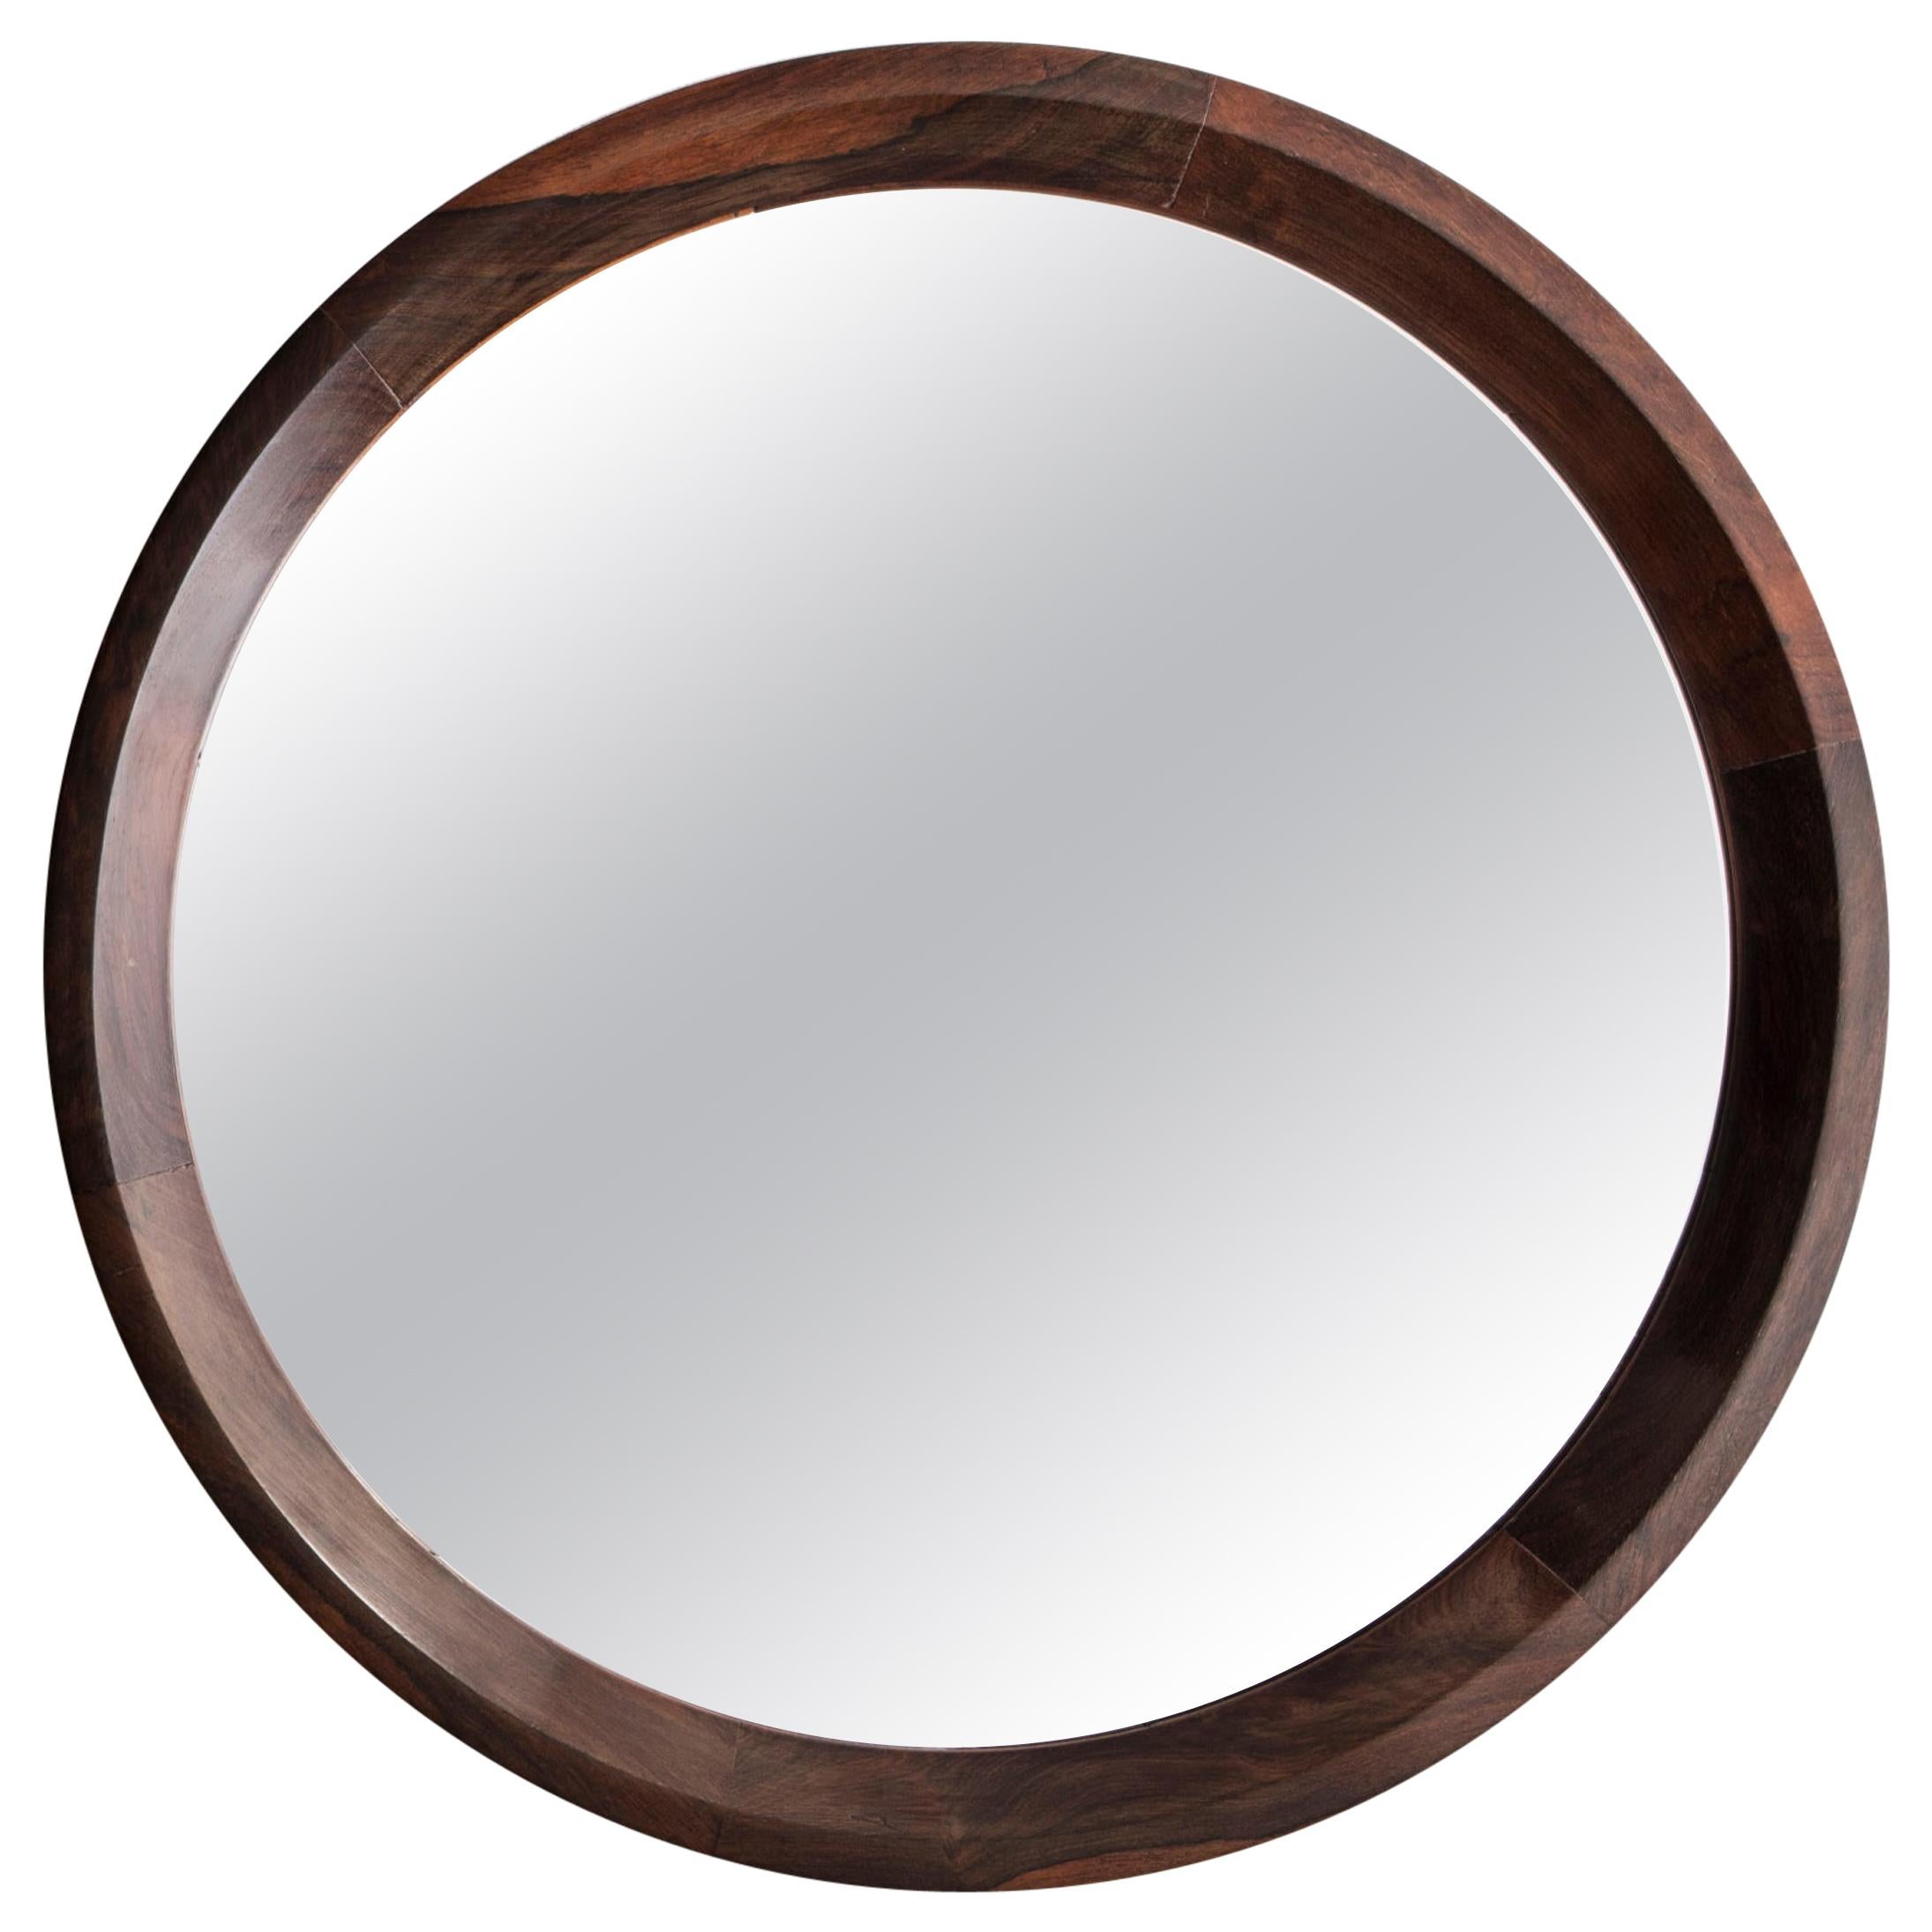 Grasselli Round Mirror with Wooden Frame by Sergio Rodrigues, circa 1960